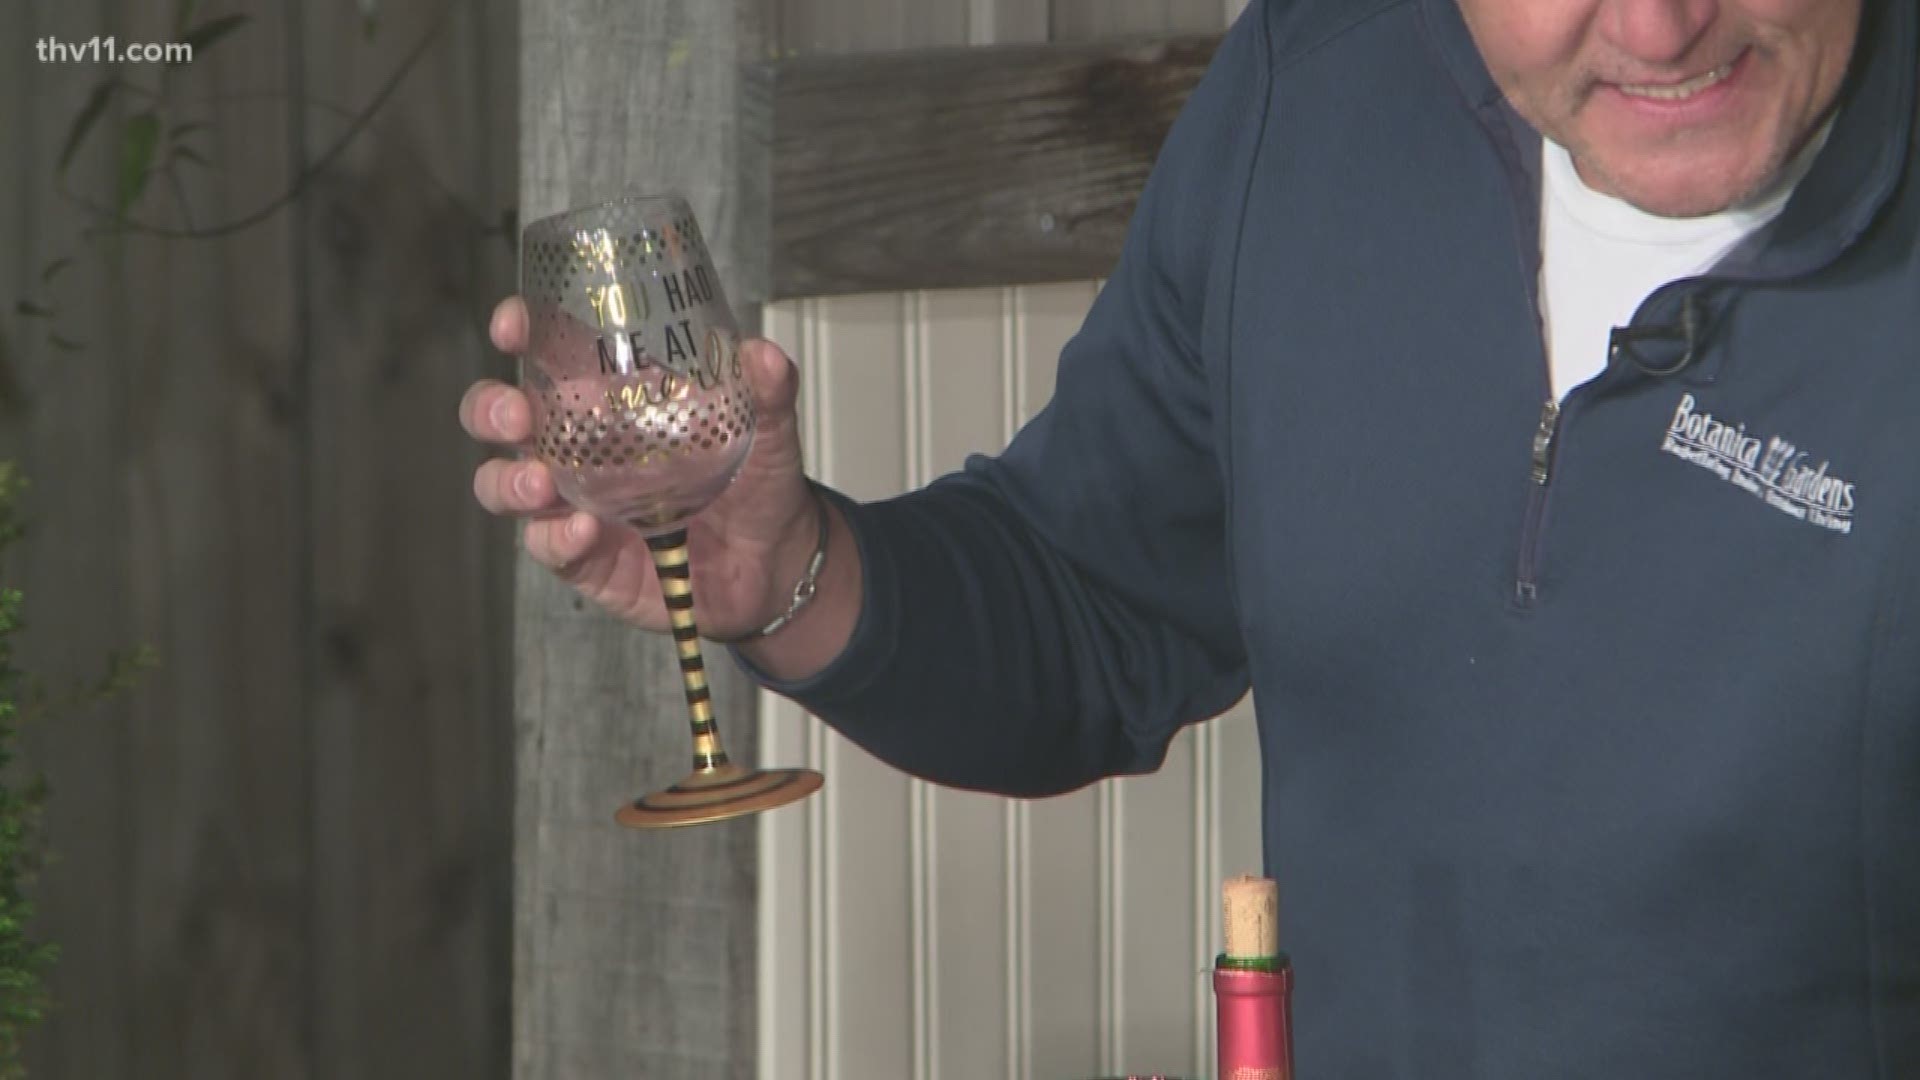 Chris H. Olsen shows us how to make personalized wine glasses for the holidays.